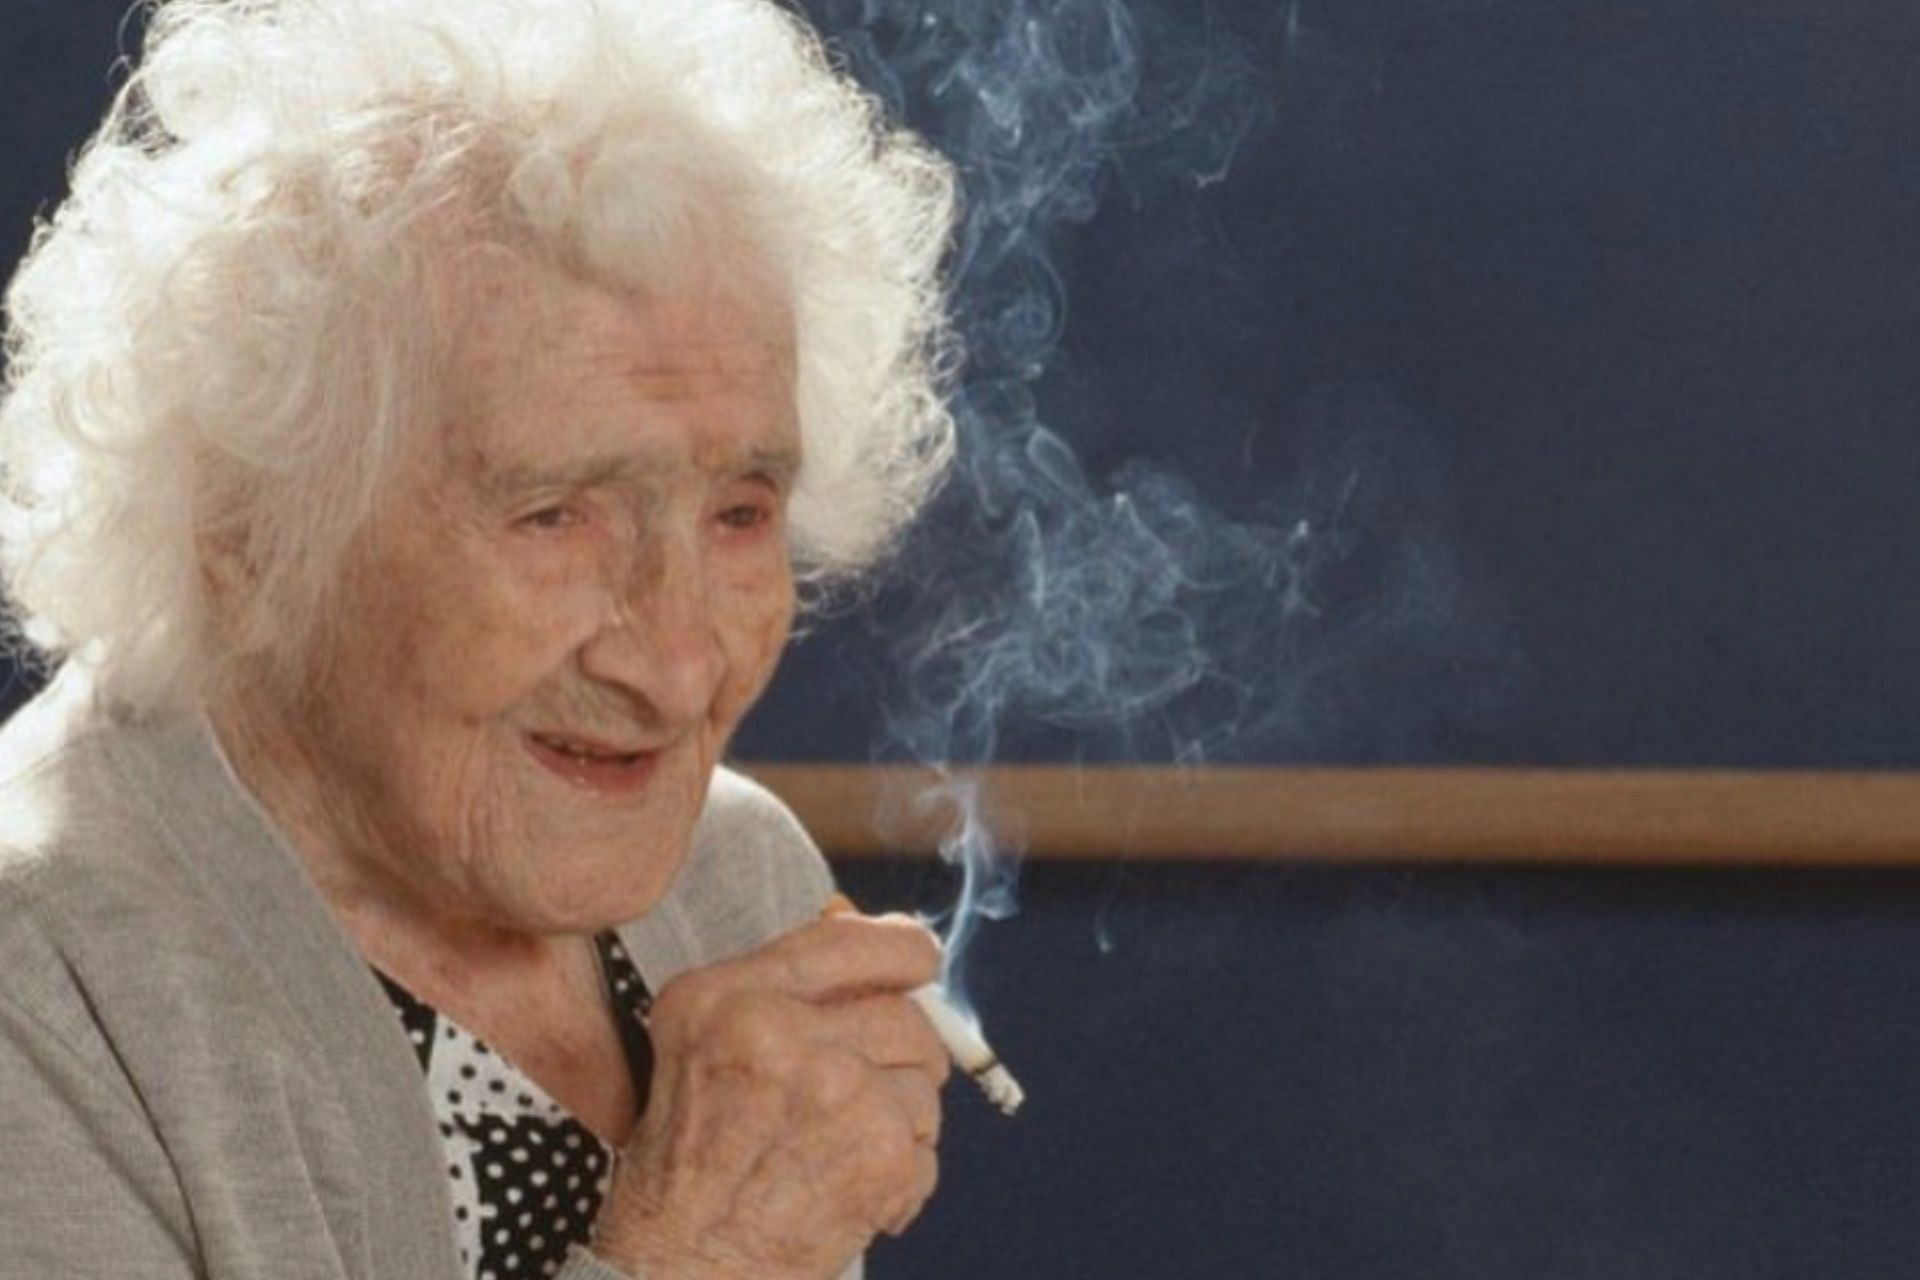 Jeanne Calment started smoking after marriage. (Photo via Instagram/womeninactionr)